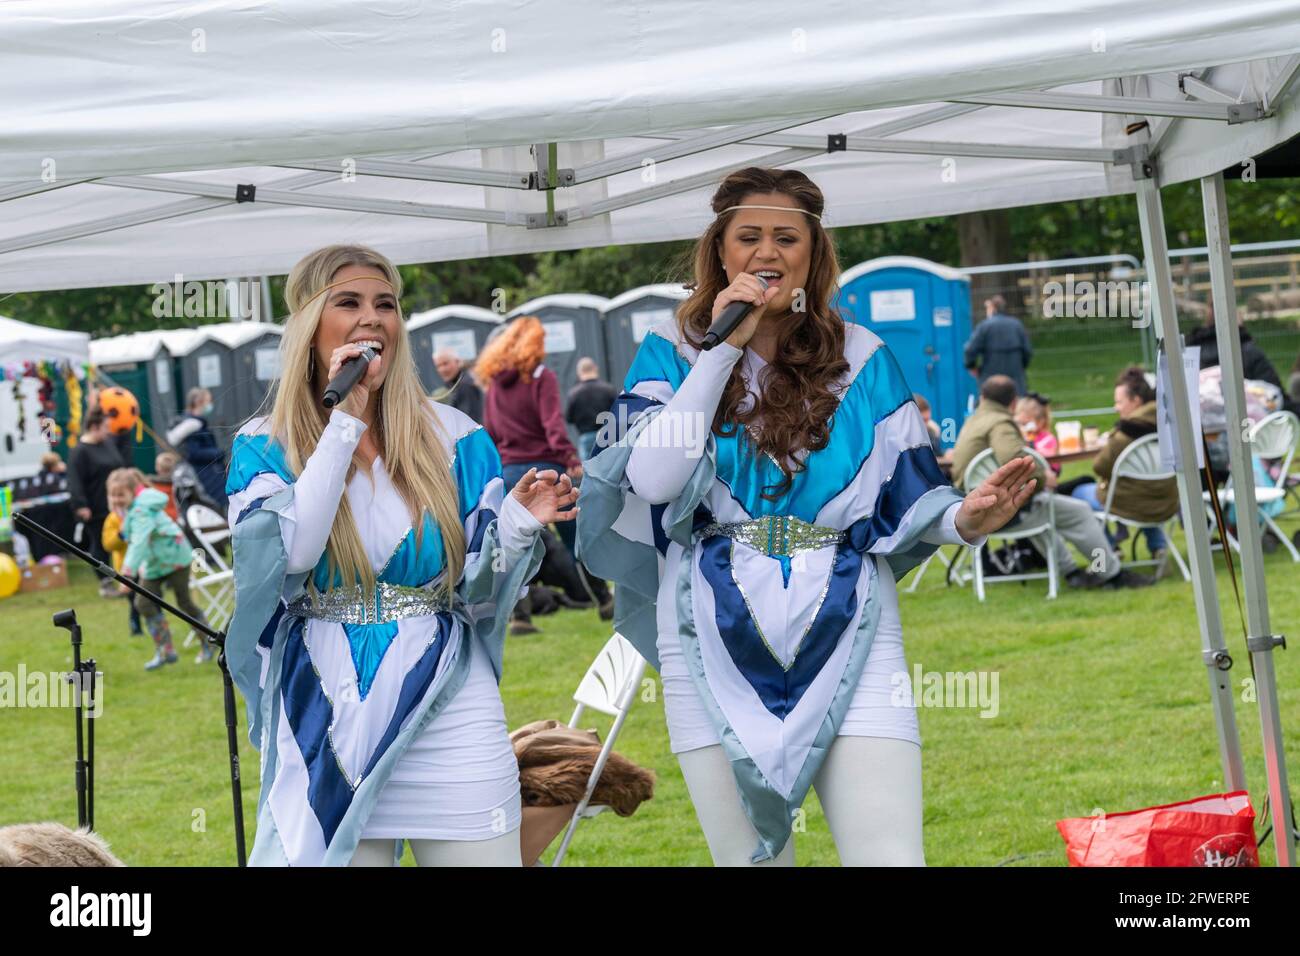 Brentwood Essex 22 maggio 2021 Weald Park Country Show, Weald Festival of Dogs, Weald Festival of Cars, Weald Country Park, Brentwood Essex, Abba tribute band, Credit: Ian Davidson/Alamy Live News Foto Stock